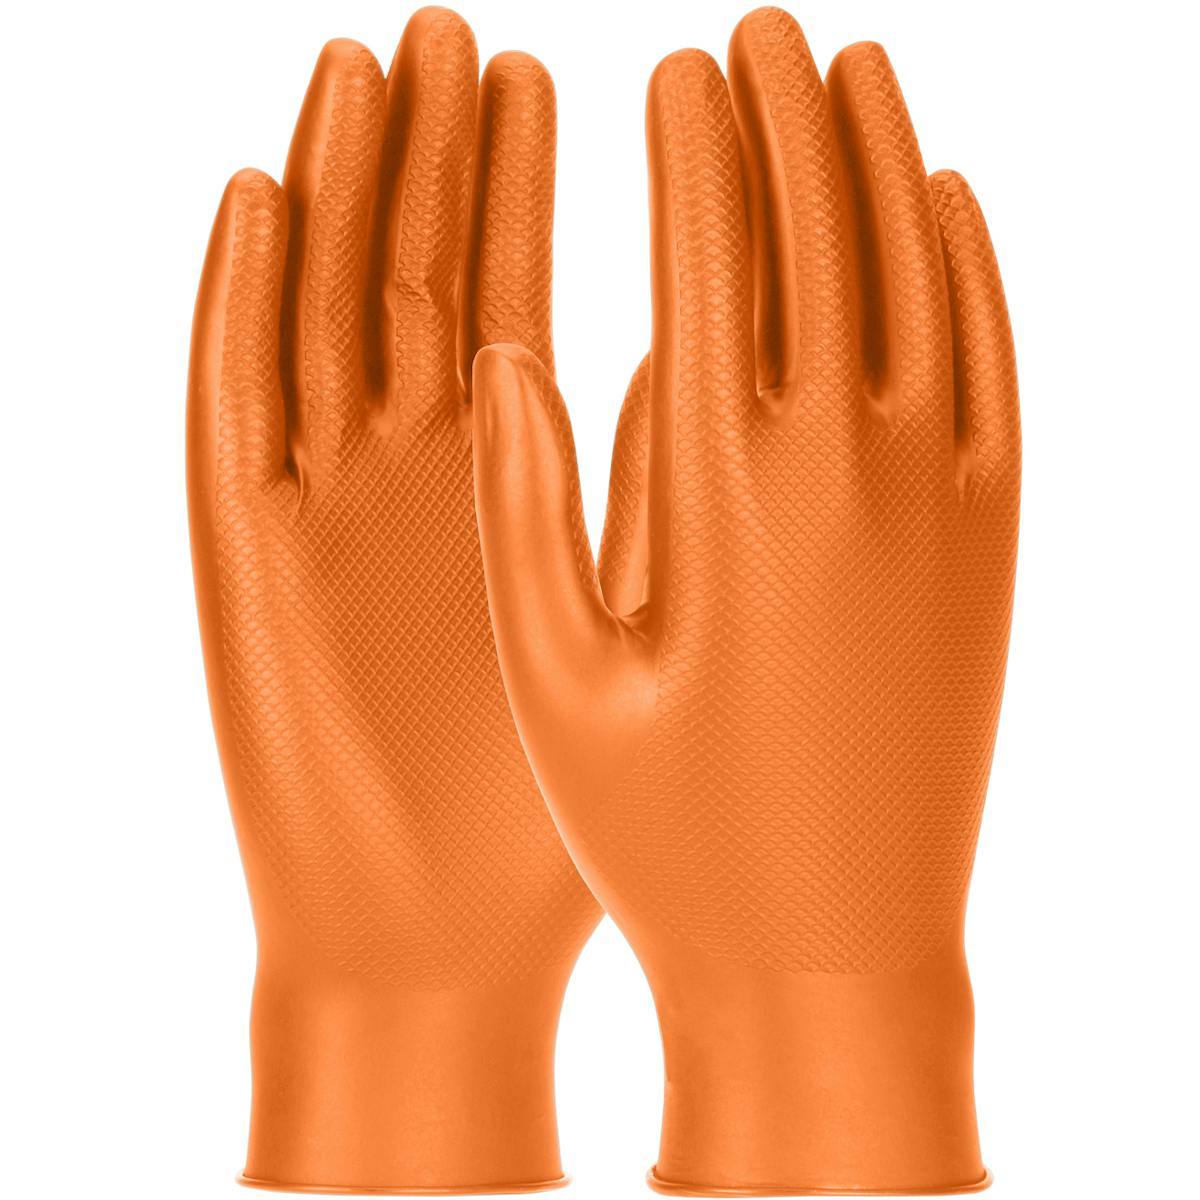 Grippaz™ Skins Extended Use Ambidextrous Nitrile Glove with Textured Fish Scale Grip - 6 Mil (67-256)